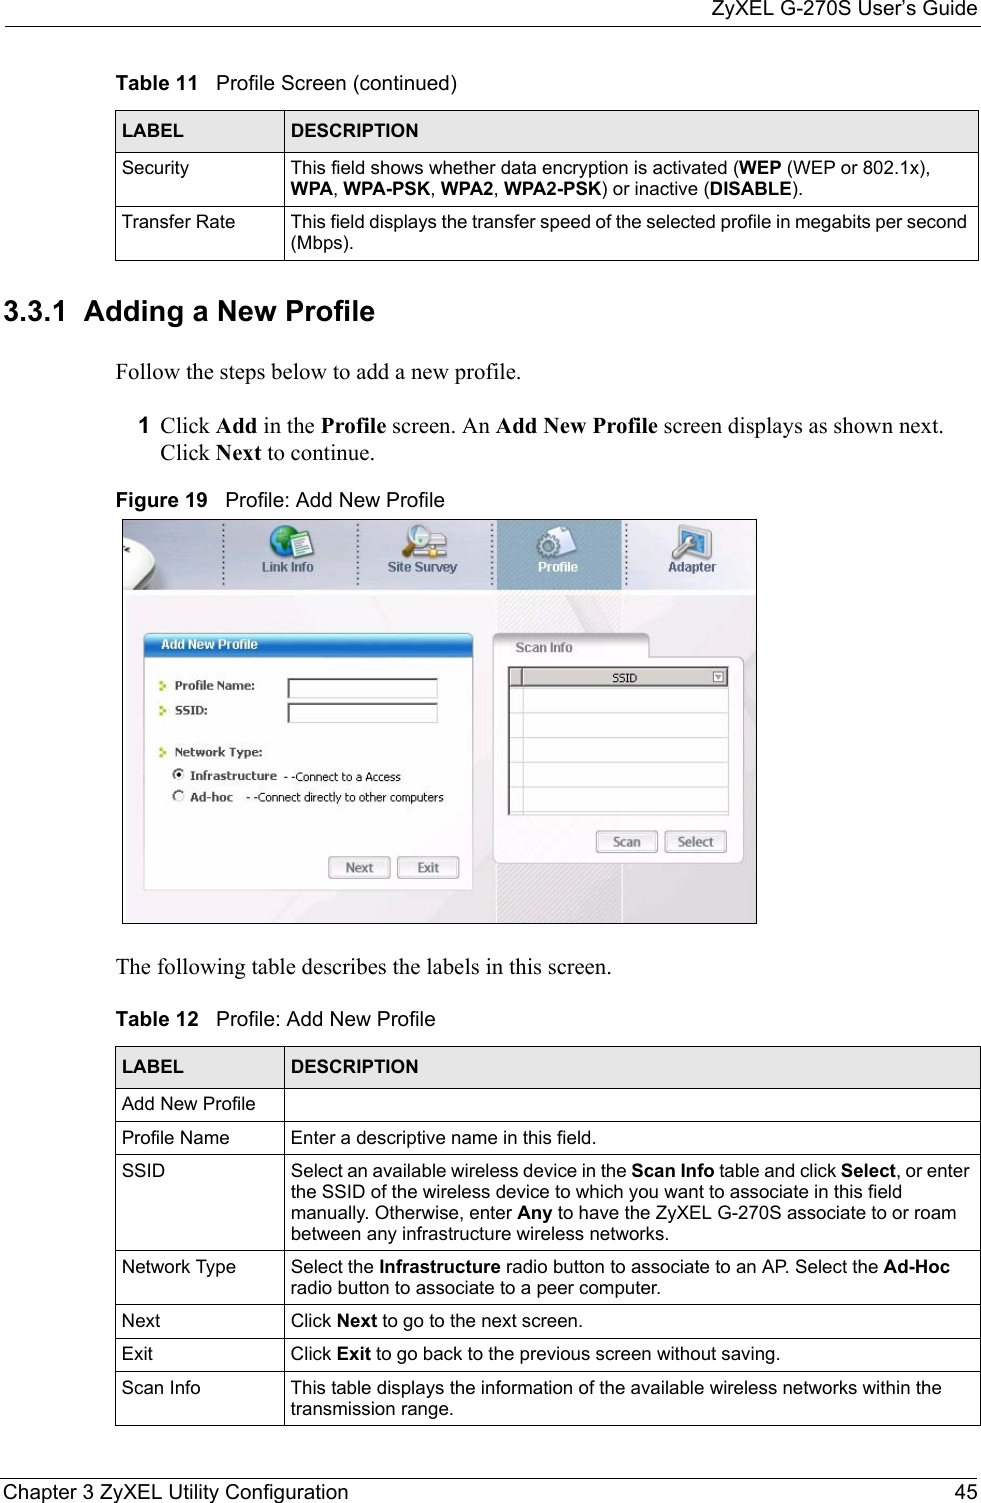 ZyXEL G-270S User’s GuideChapter 3 ZyXEL Utility Configuration 453.3.1  Adding a New ProfileFollow the steps below to add a new profile.1Click Add in the Profile screen. An Add New Profile screen displays as shown next. Click Next to continue.Figure 19   Profile: Add New Profile The following table describes the labels in this screen. Security This field shows whether data encryption is activated (WEP (WEP or 802.1x), WPA, WPA-PSK, WPA2, WPA2-PSK) or inactive (DISABLE).Transfer Rate This field displays the transfer speed of the selected profile in megabits per second (Mbps).Table 11   Profile Screen (continued)LABEL DESCRIPTIONTable 12   Profile: Add New Profile LABEL DESCRIPTIONAdd New ProfileProfile Name Enter a descriptive name in this field.SSID Select an available wireless device in the Scan Info table and click Select, or enter the SSID of the wireless device to which you want to associate in this field manually. Otherwise, enter Any to have the ZyXEL G-270S associate to or roam between any infrastructure wireless networks.Network Type Select the Infrastructure radio button to associate to an AP. Select the Ad-Hoc radio button to associate to a peer computer.Next Click Next to go to the next screen.Exit Click Exit to go back to the previous screen without saving.Scan Info This table displays the information of the available wireless networks within the transmission range.